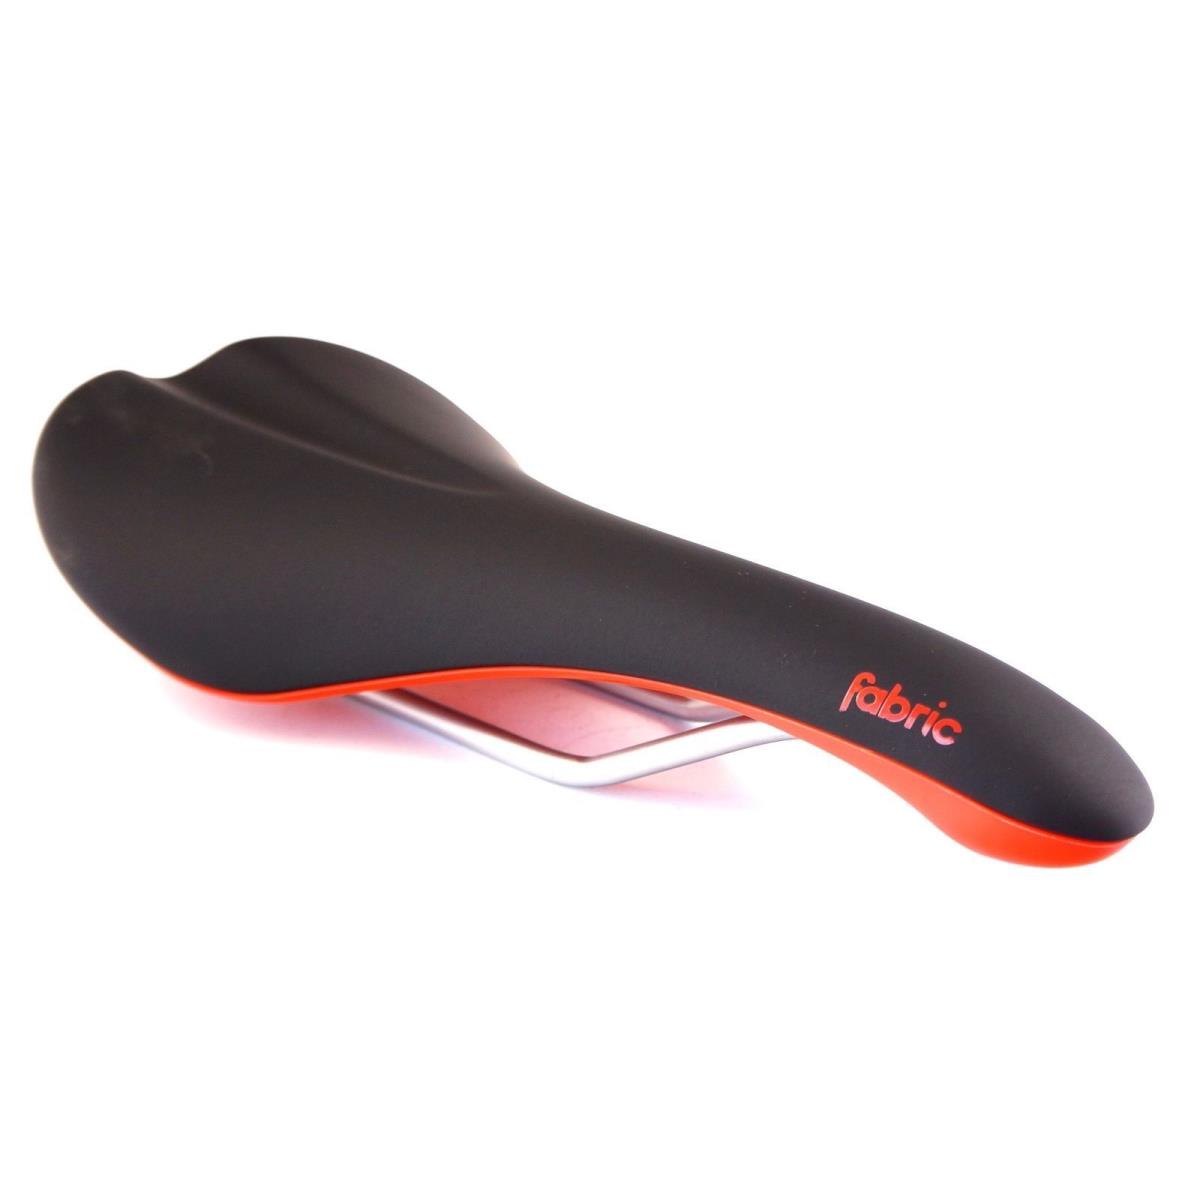 Fabric Scoop Nylon Radius Saddle Mtb Road Bicycle For Cannondale 5 Color Types